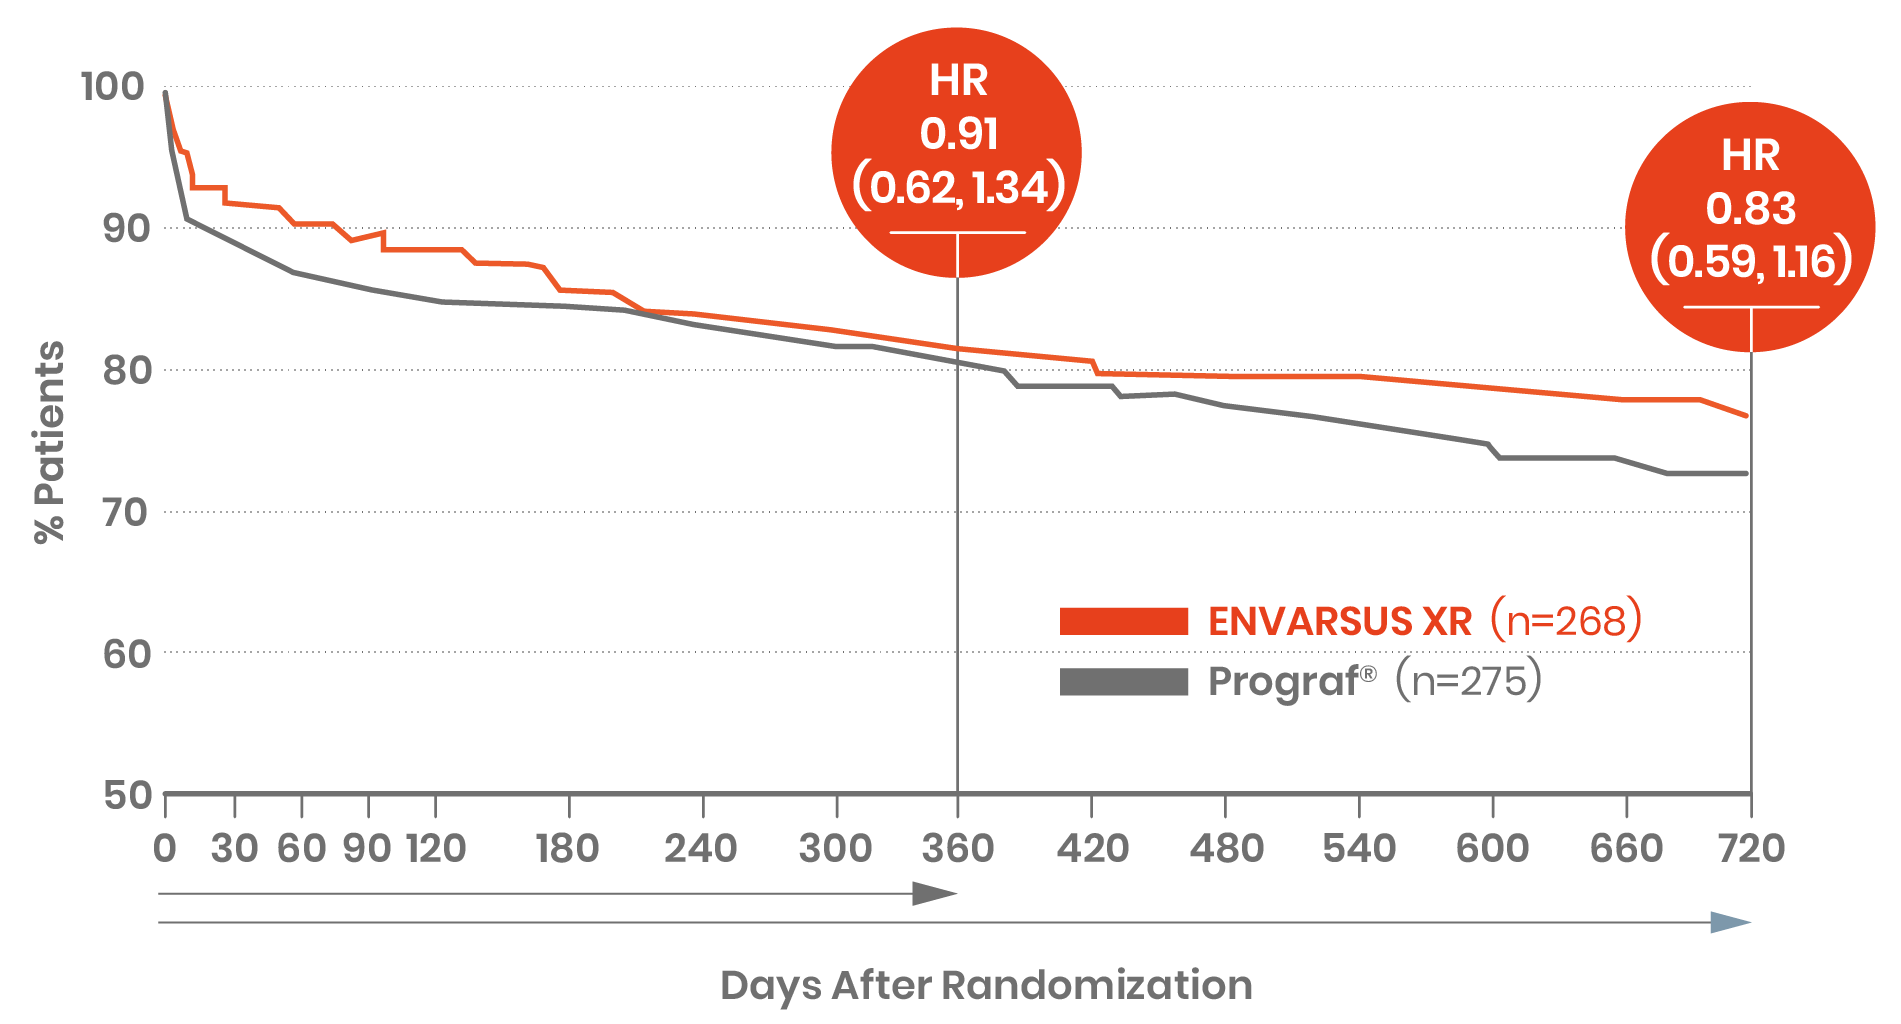 Graph comparing the percentage of patients' HR between Prograf and Envarsus XR over a 2 year period